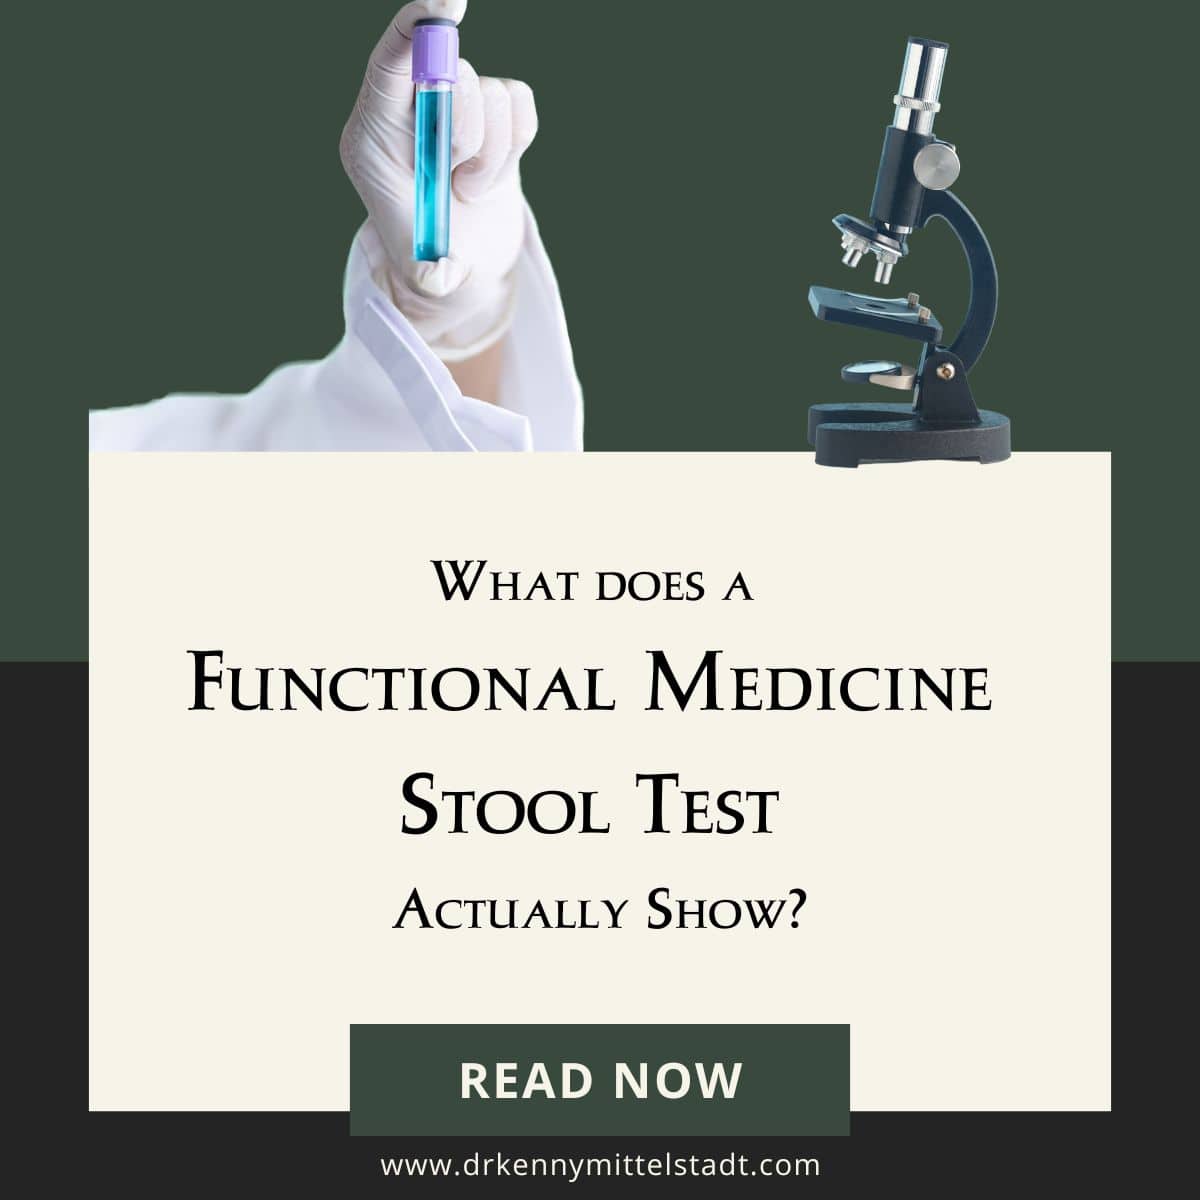 This is the blog post featured image that show a picture of a microscope and gloved hand with a vial - The title is What Does a Functional Medicine Stool Test Actually Show?